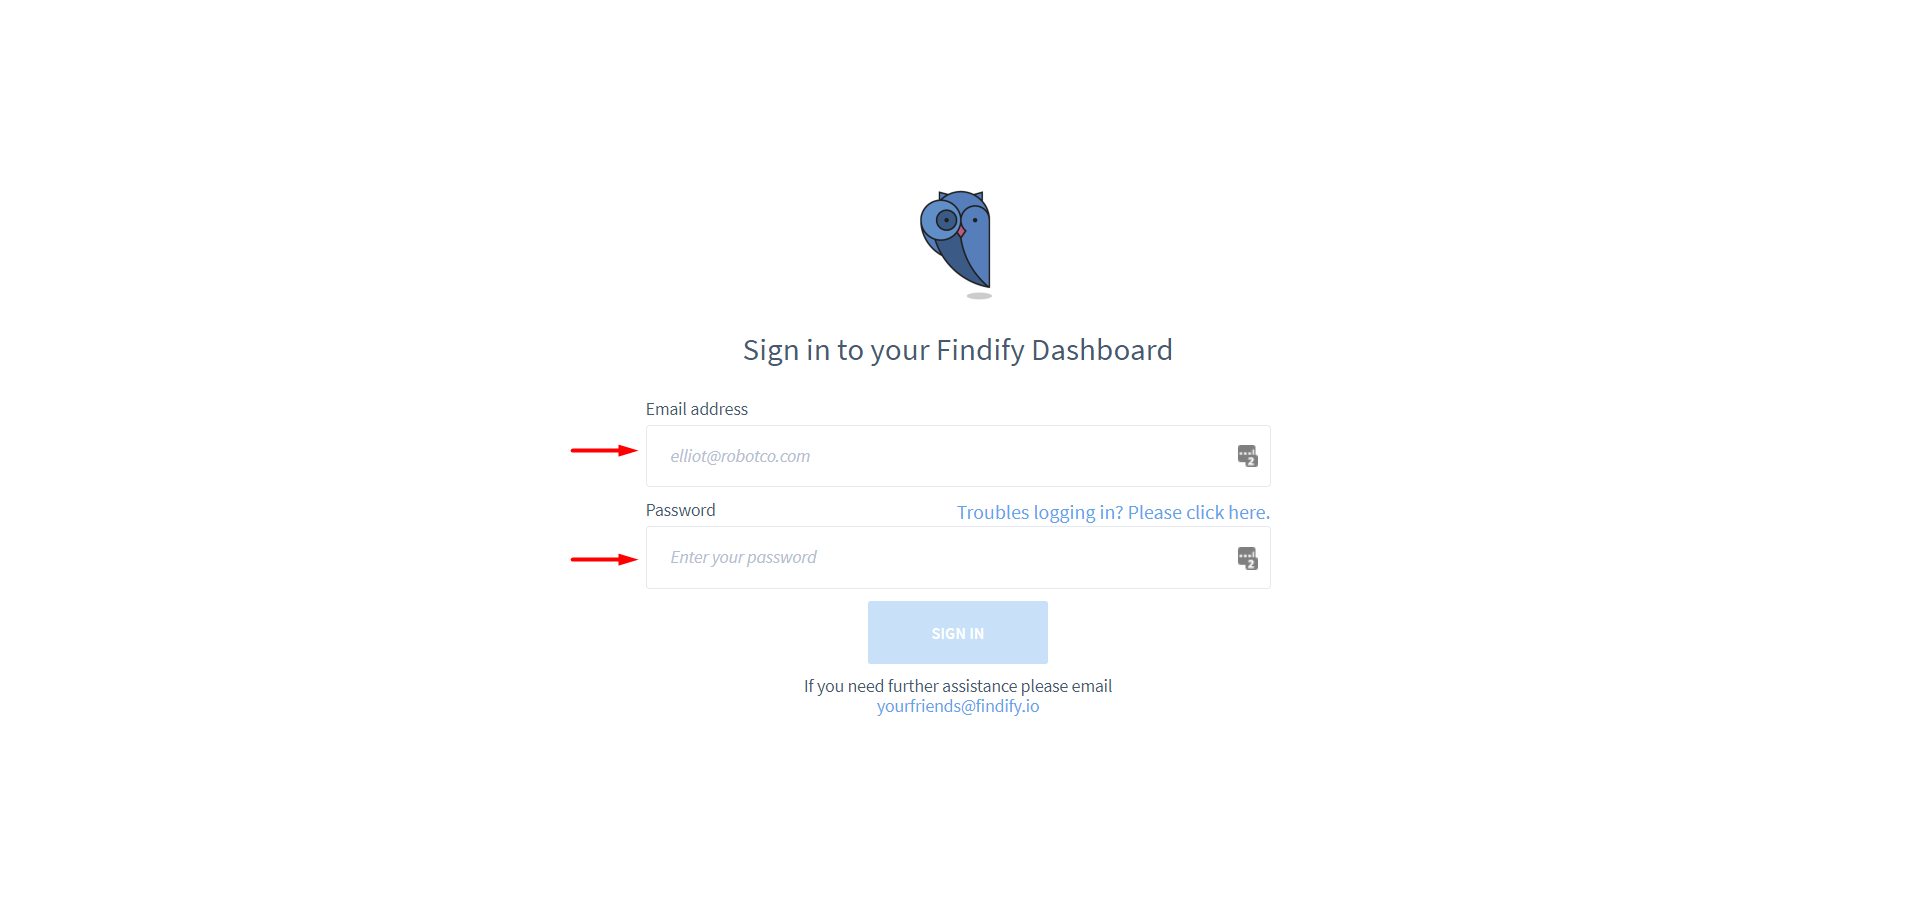 Login using your Shopify account email and the password that you have created through the link.